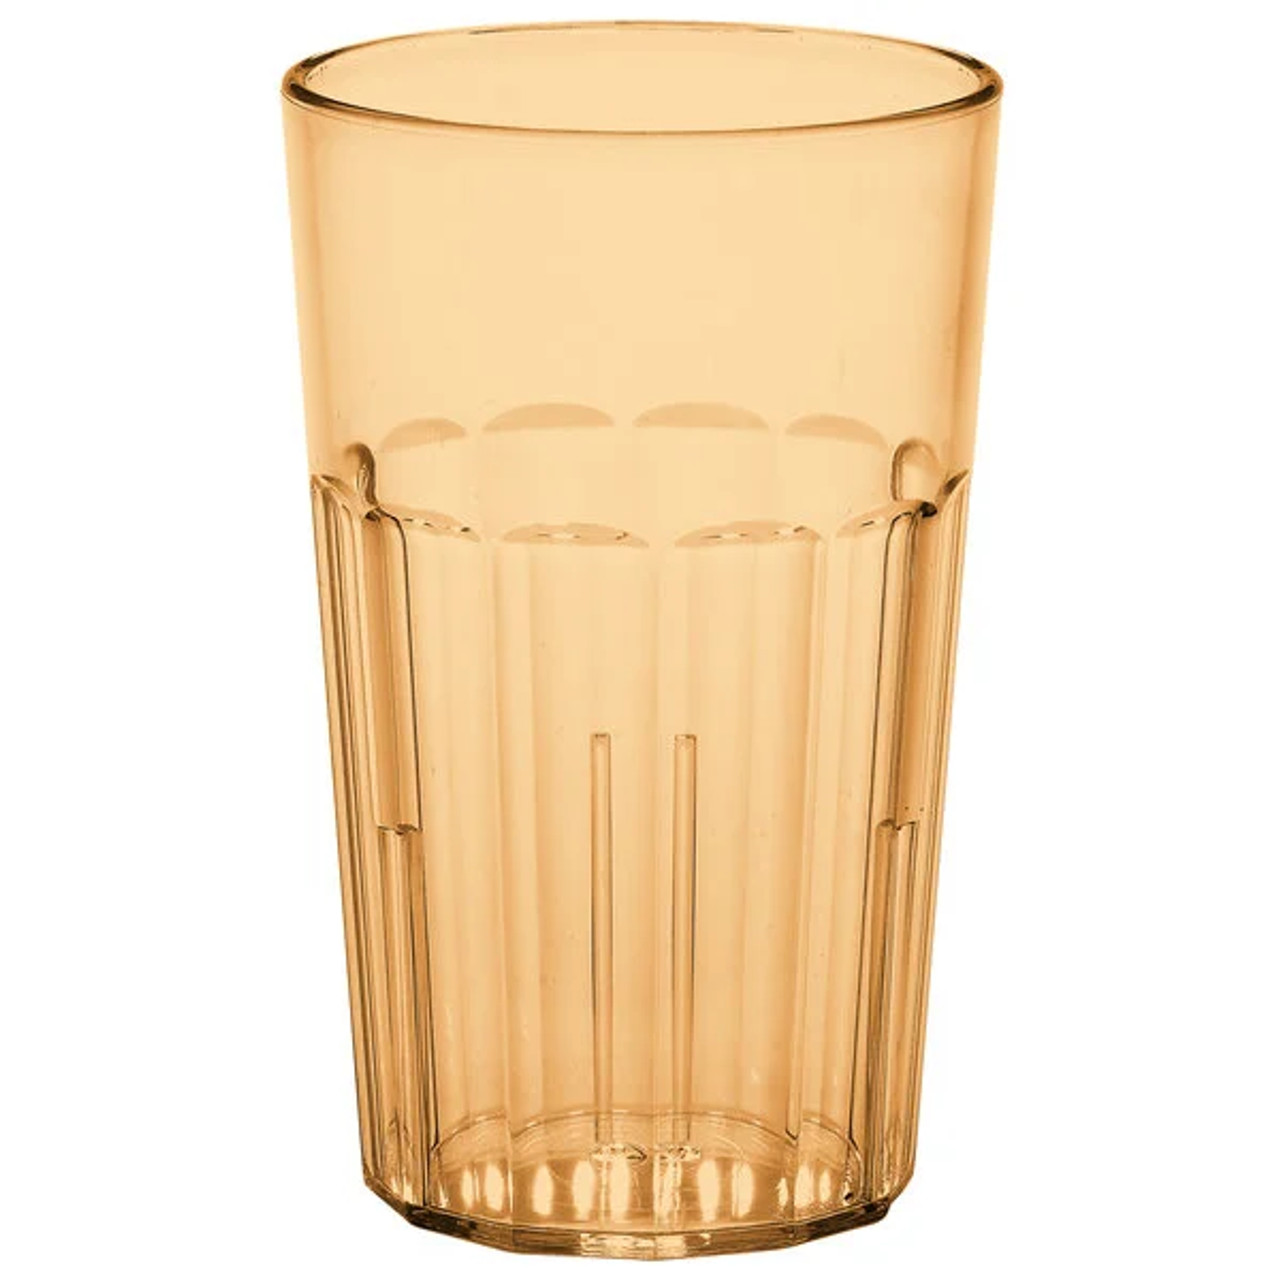 Cambro 14 oz Amber Fluted Plastic Tumbler (36/Case) - Chip-Resistant SAN Plastic - Chicken Pieces